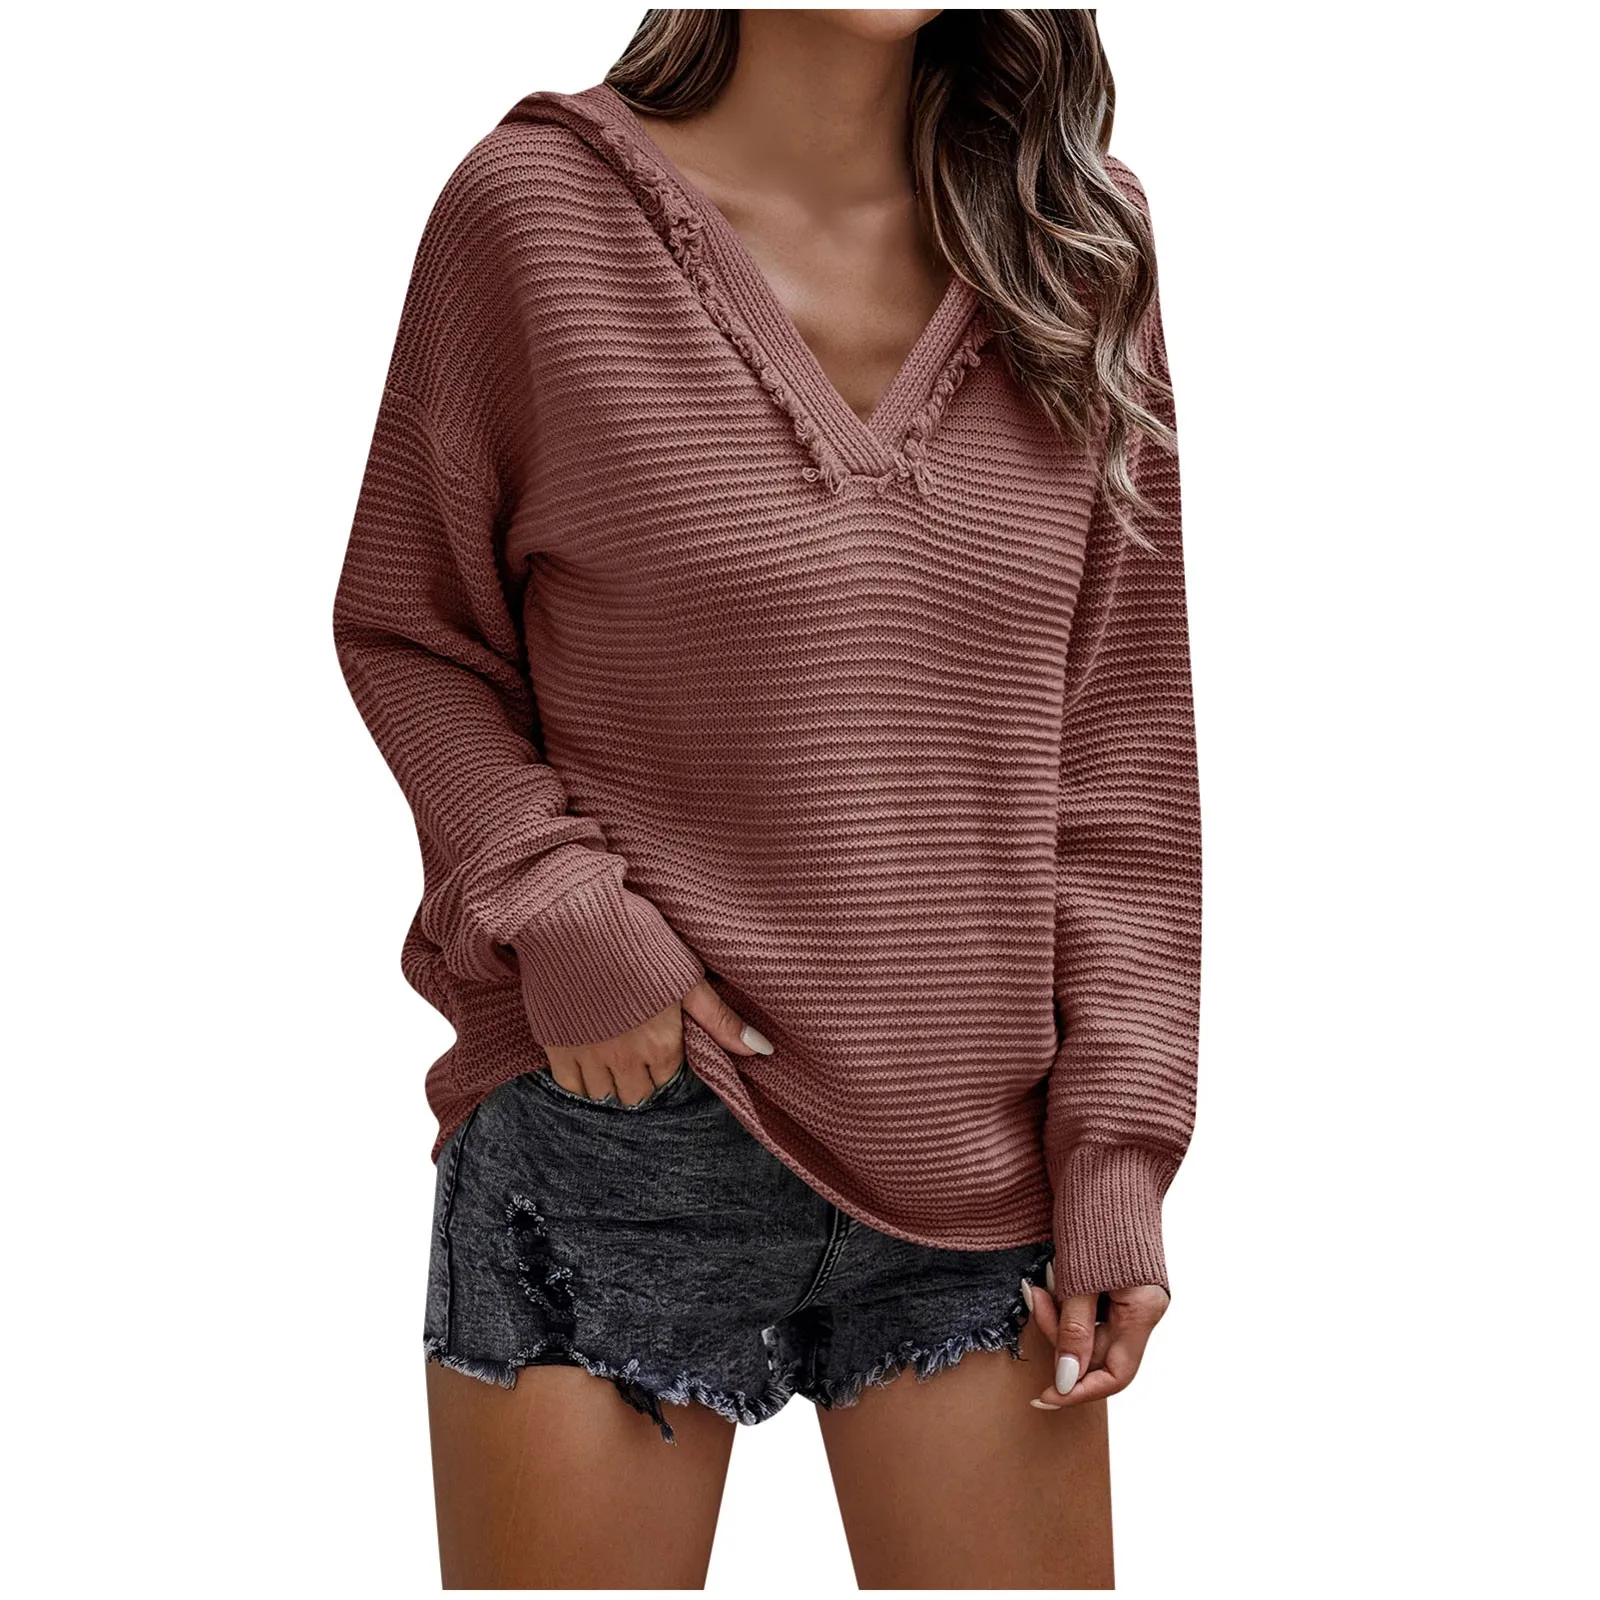 

Long Sleeve Knitwear For Women Winter Sexy V Neck Ribbed Knit Tunic Fall Sweater Pullover Ribbed Tops Hoodie Knit Sweater